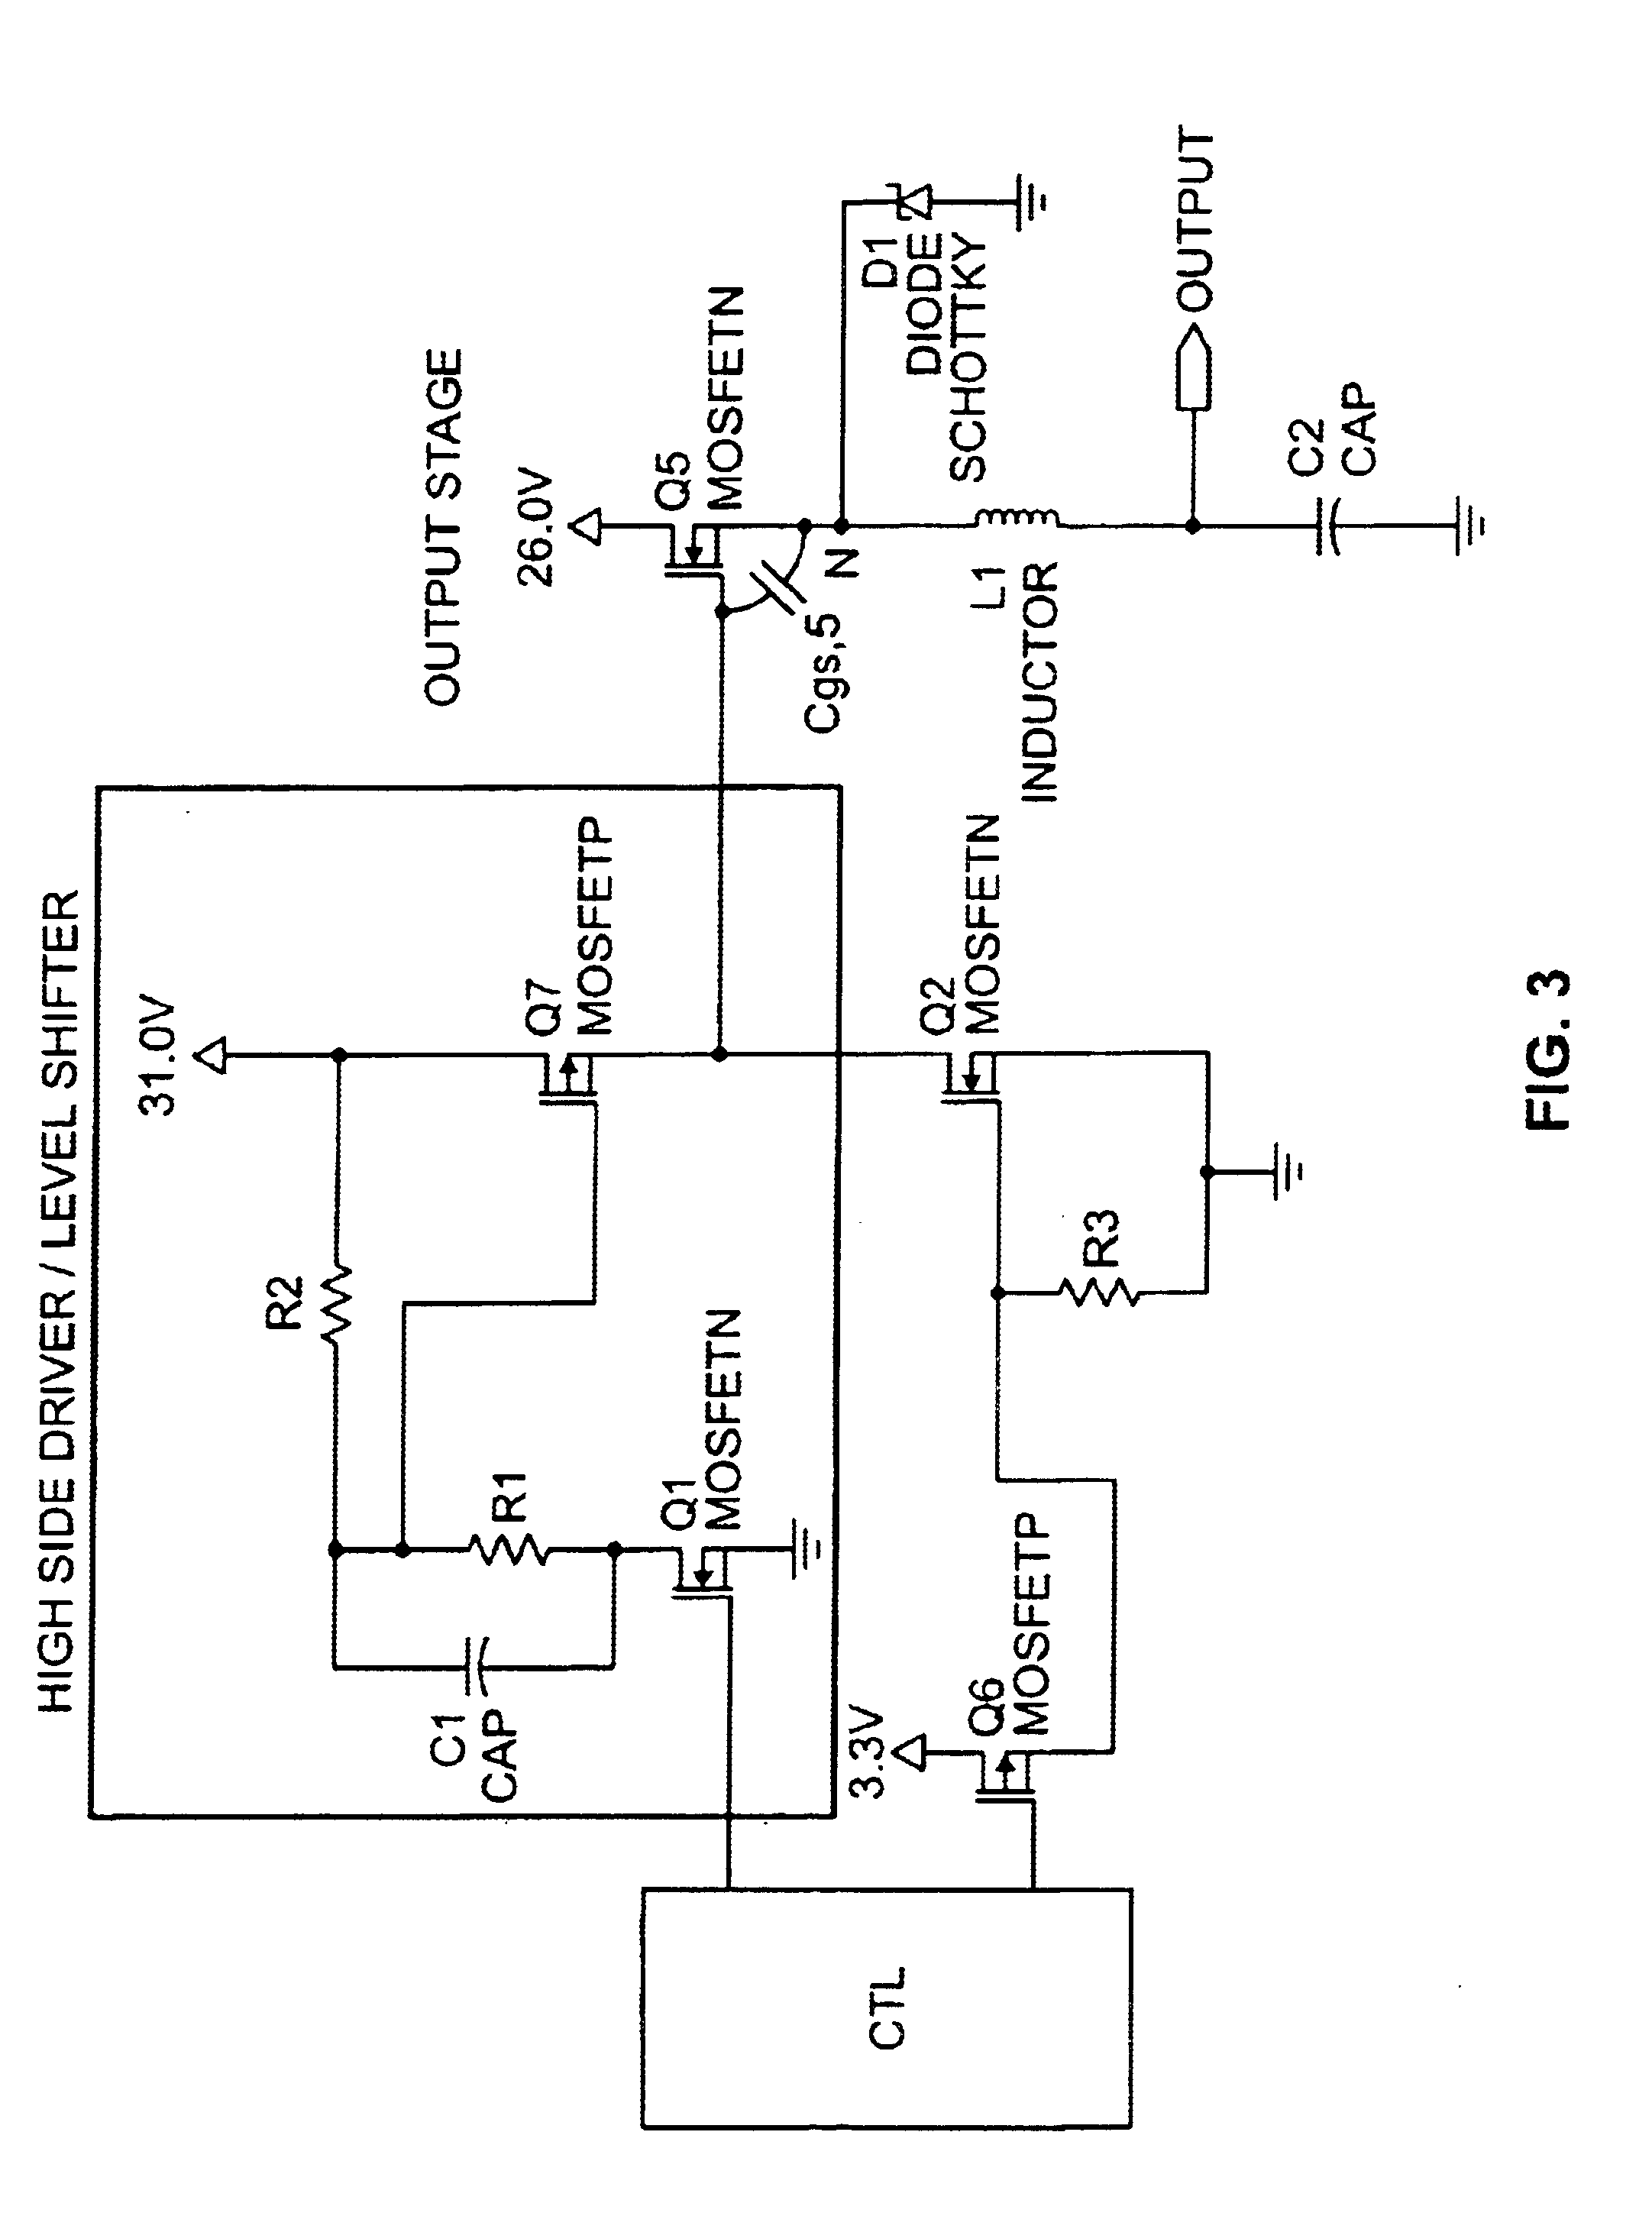 Switch mode power supply and driving method for efficient RF amplification